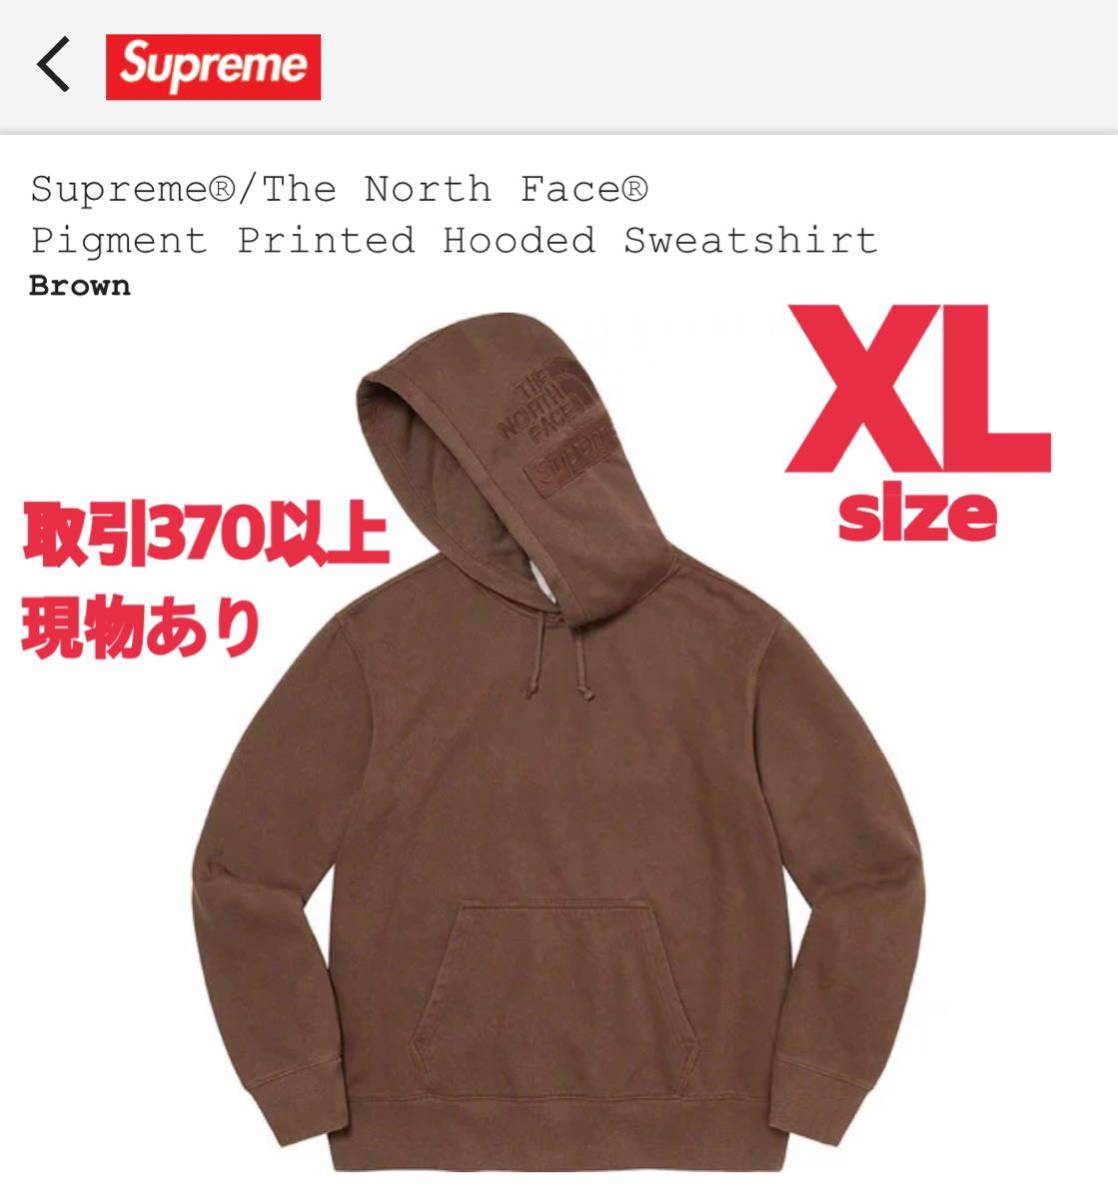 Supreme The North Face Pigment Printed Hooded Sweatshirt Brown XL